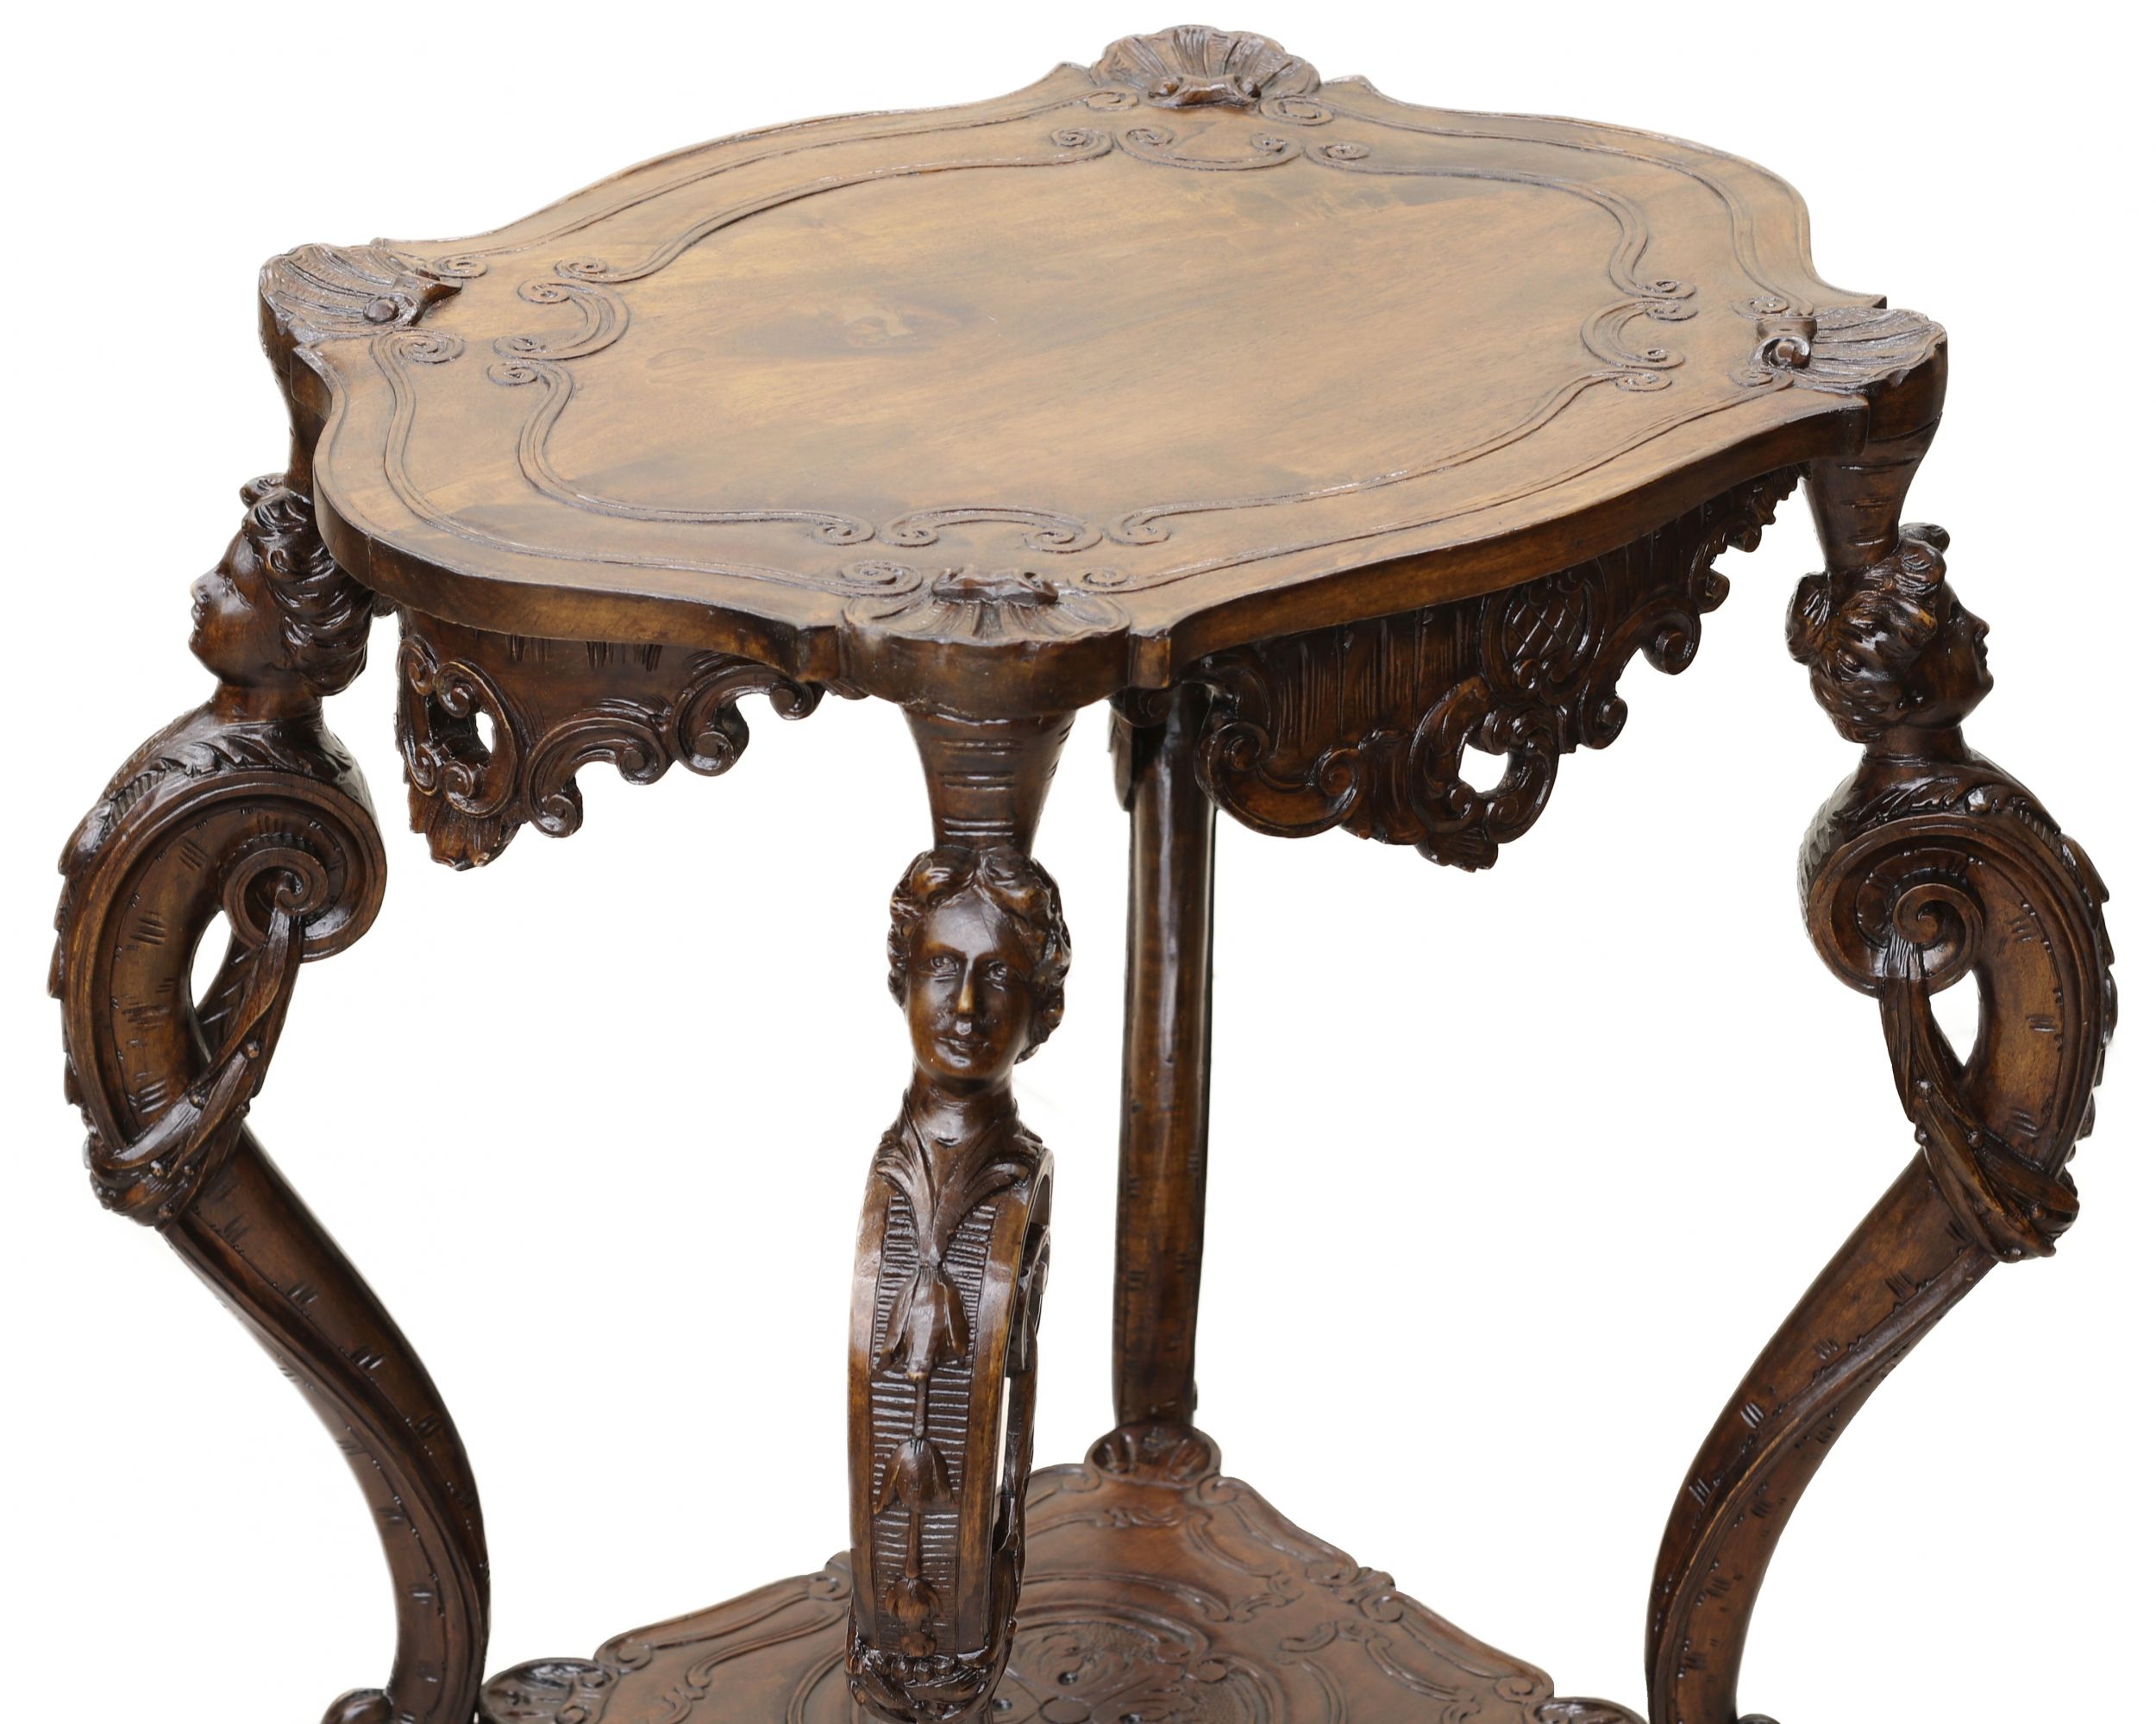 Carved wooden table in neo-Rococo style from the turn of the 19th century. - Image 6 of 7